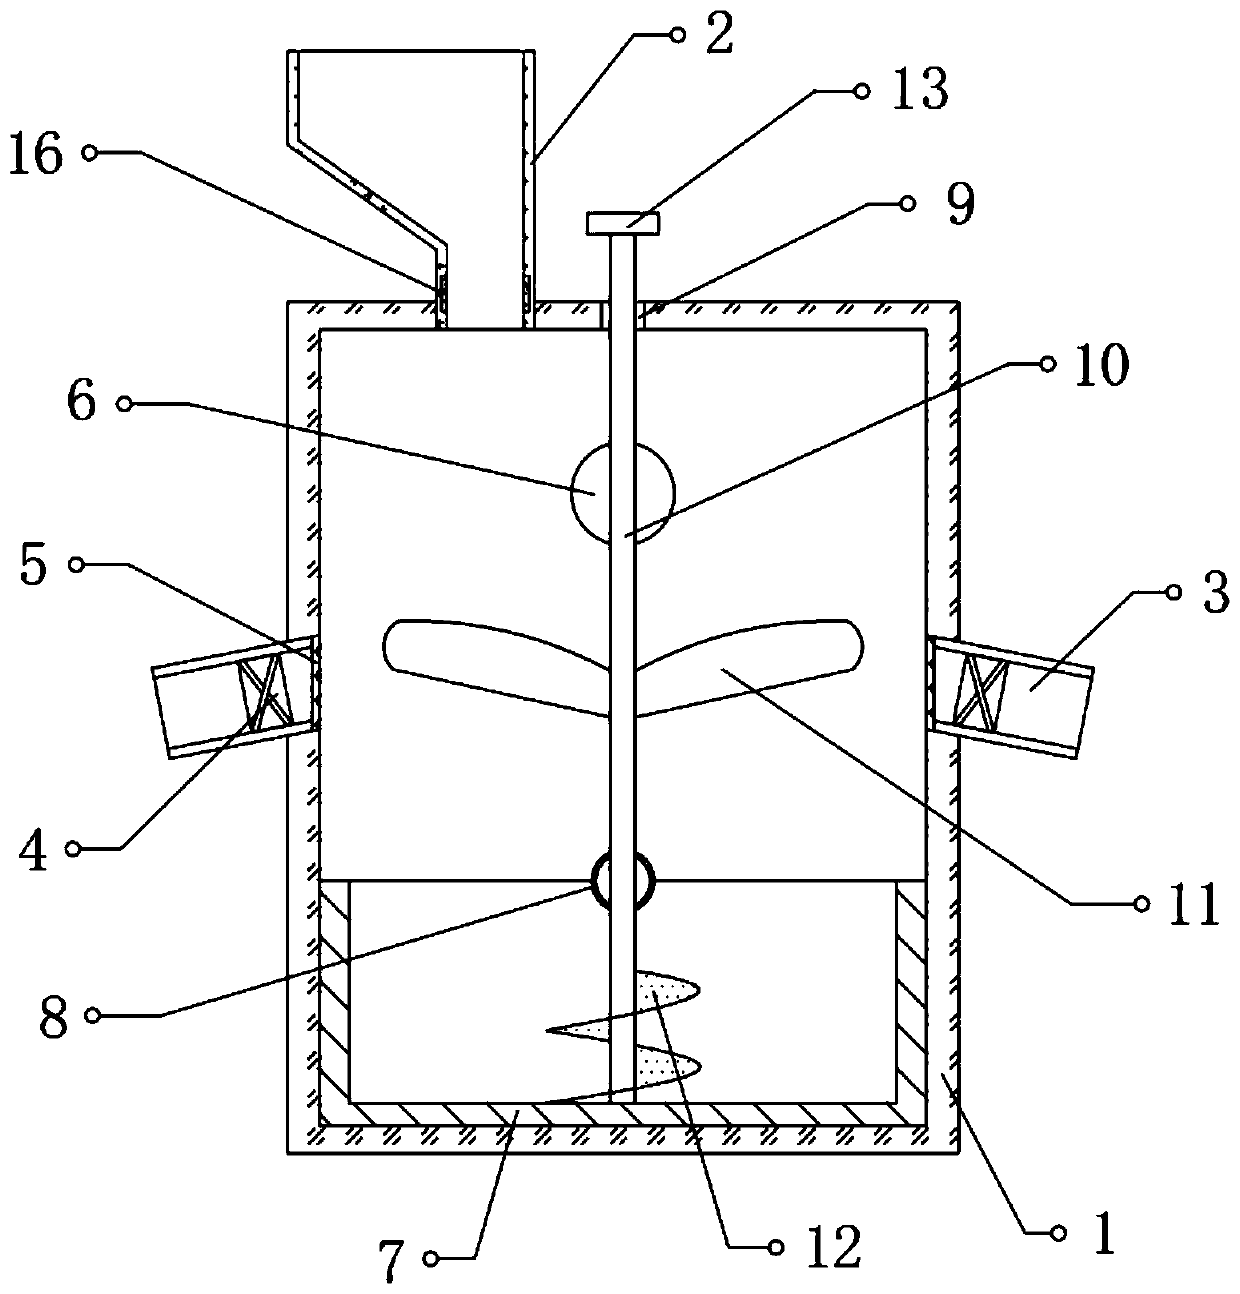 Seed screening device for agricultural production